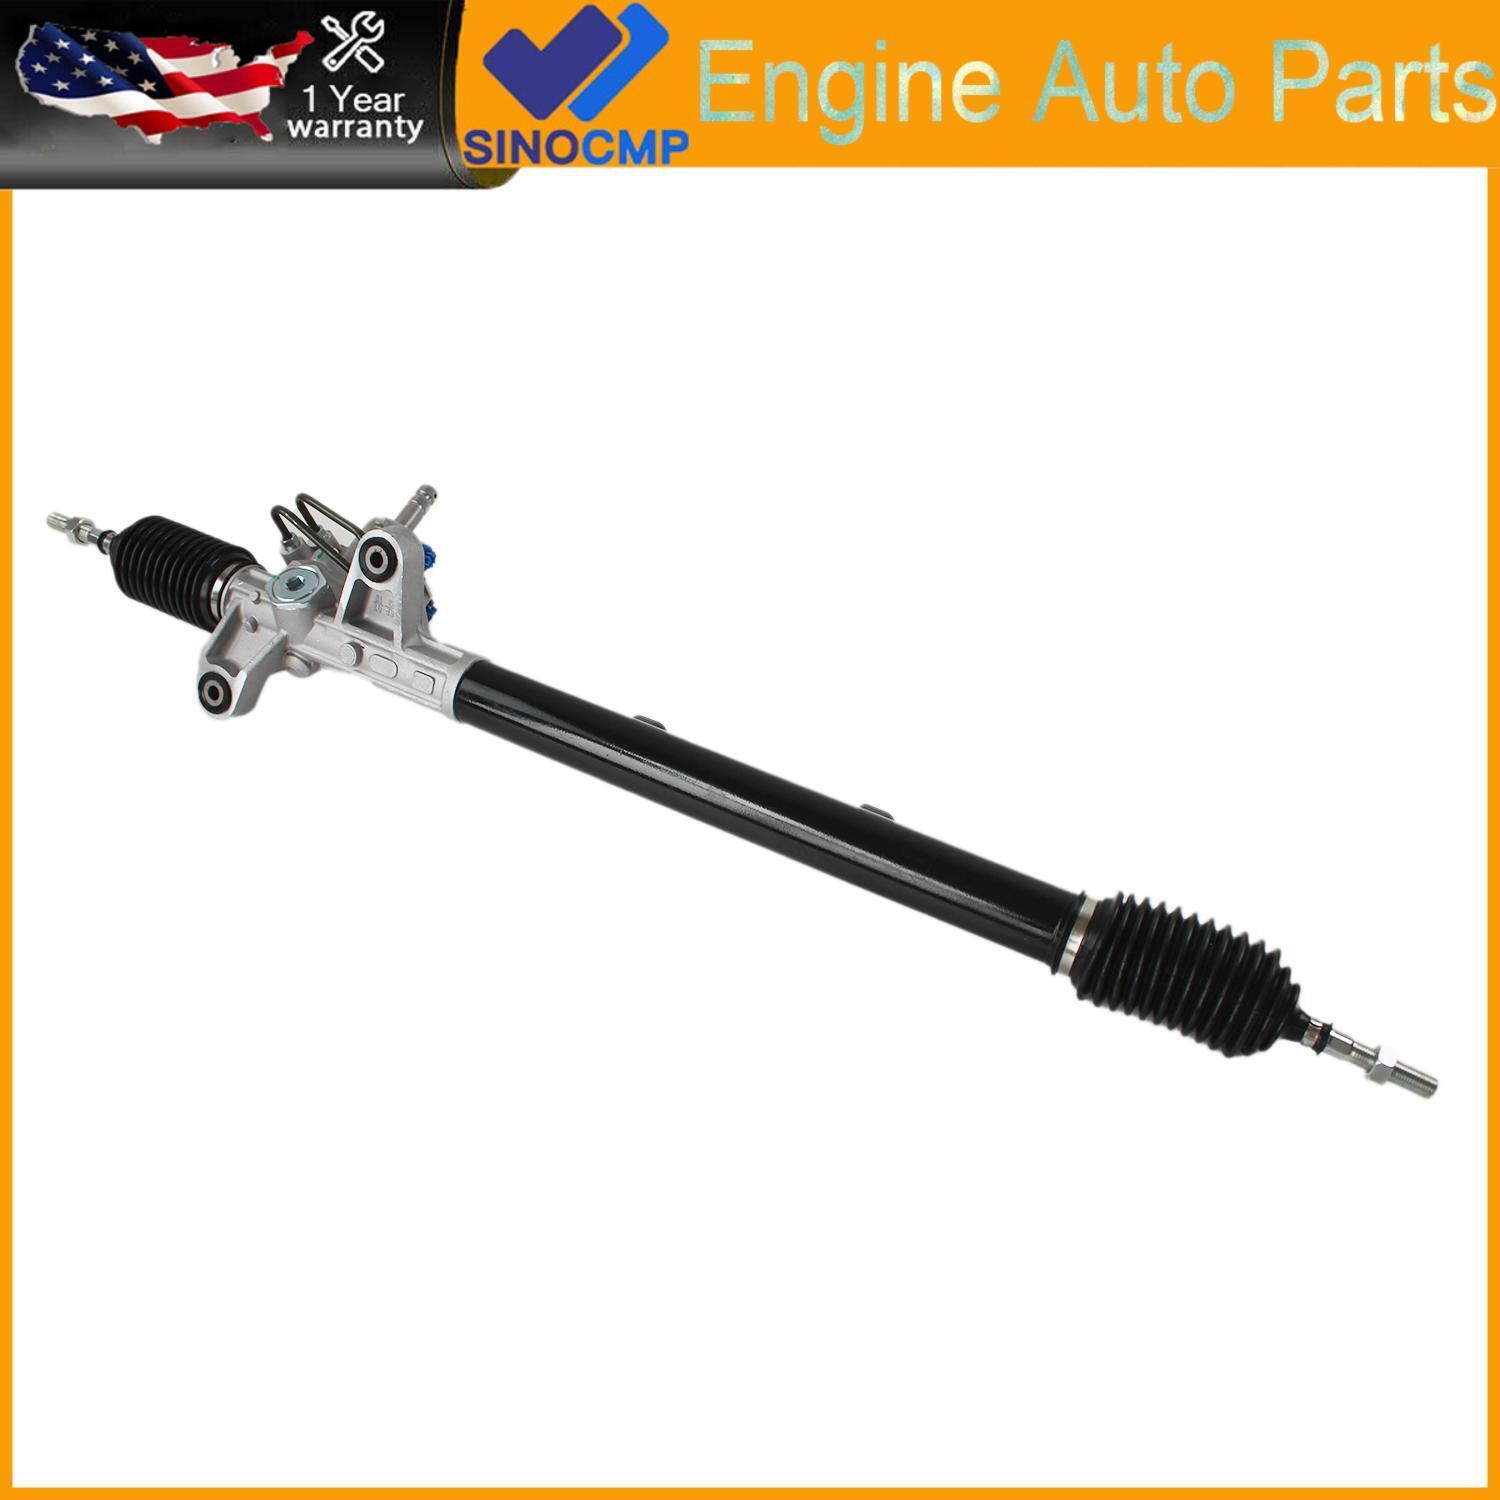 New Power Steering Rack & Pinion Assembly For 2004-2008 Acura TSX 2.4L 26-2720